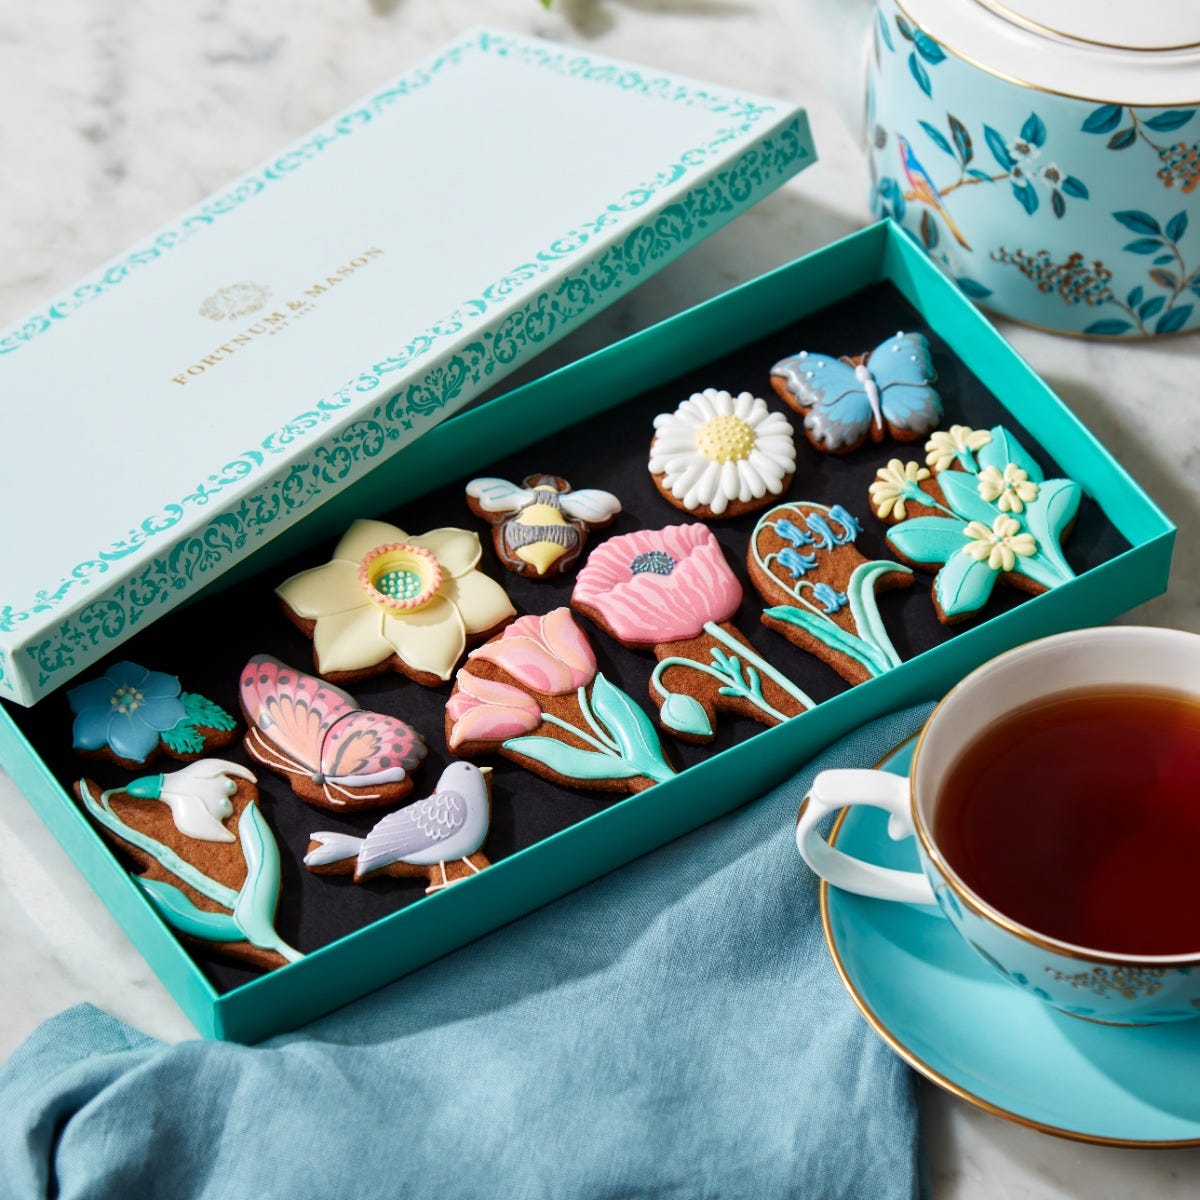 Meadow Flowers Iced Biscuits, Fortnum & Mason